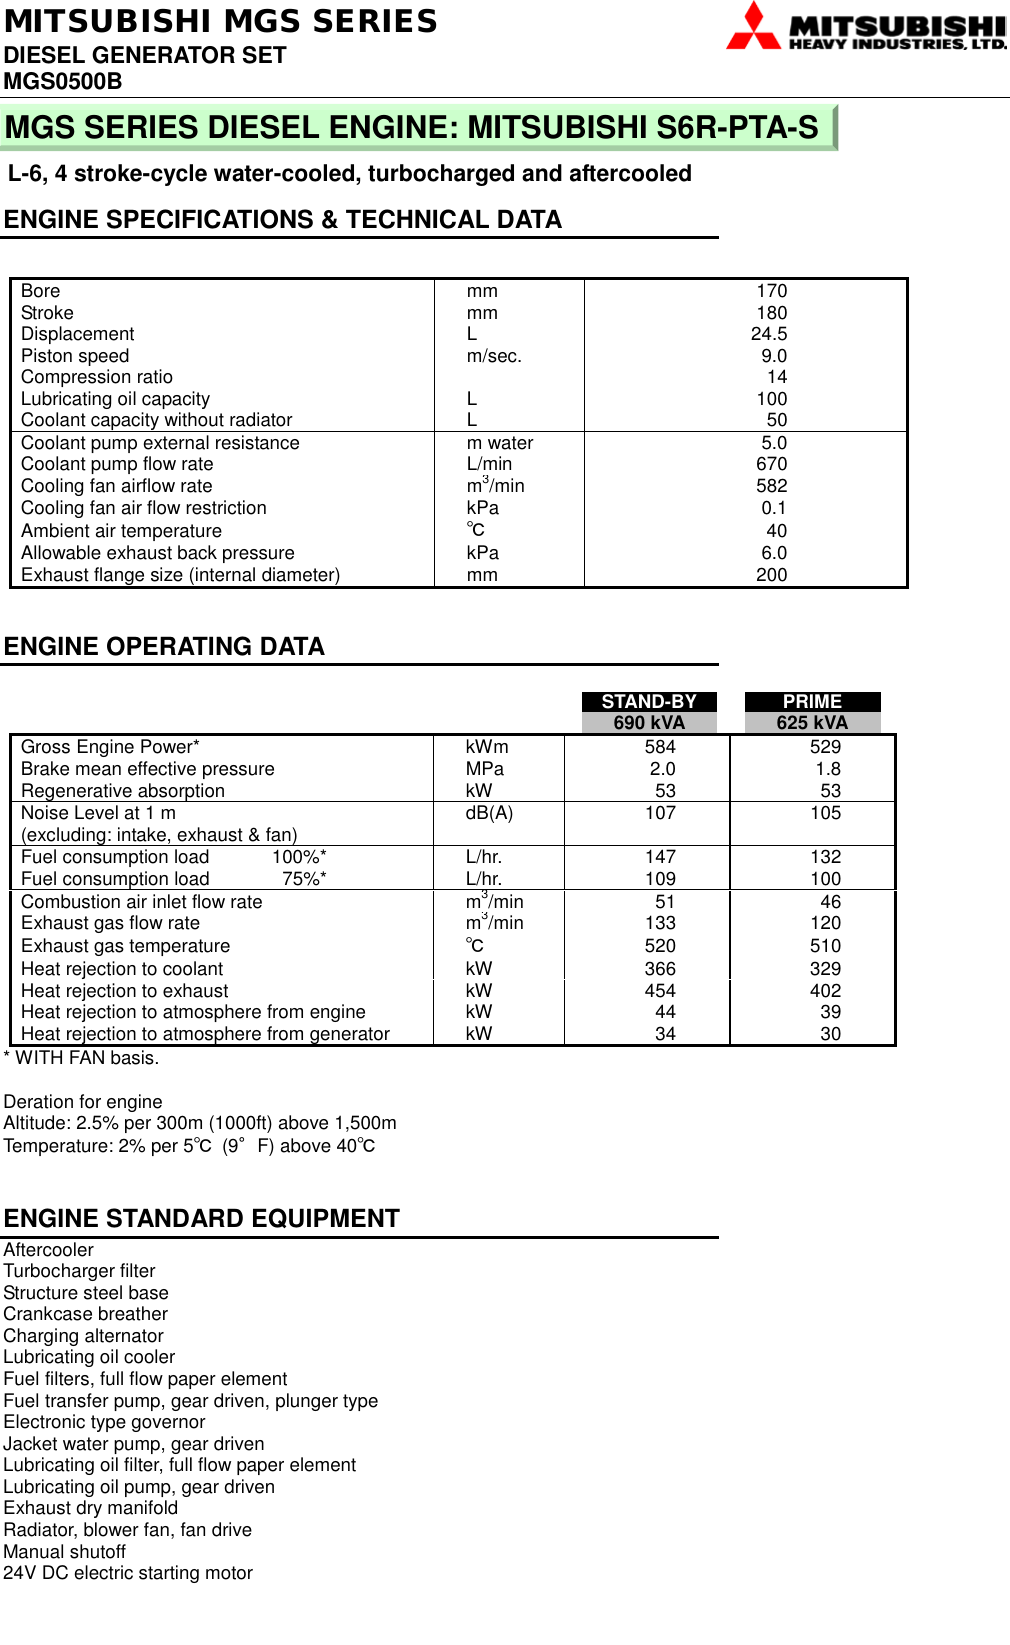 Page 2 of 4 - Mitsubishi 5P-H5F MGS SERIES 560 CONTROL PANEL User Manual  To The 5c219300-3202-4d1e-8773-f8b6084f2897